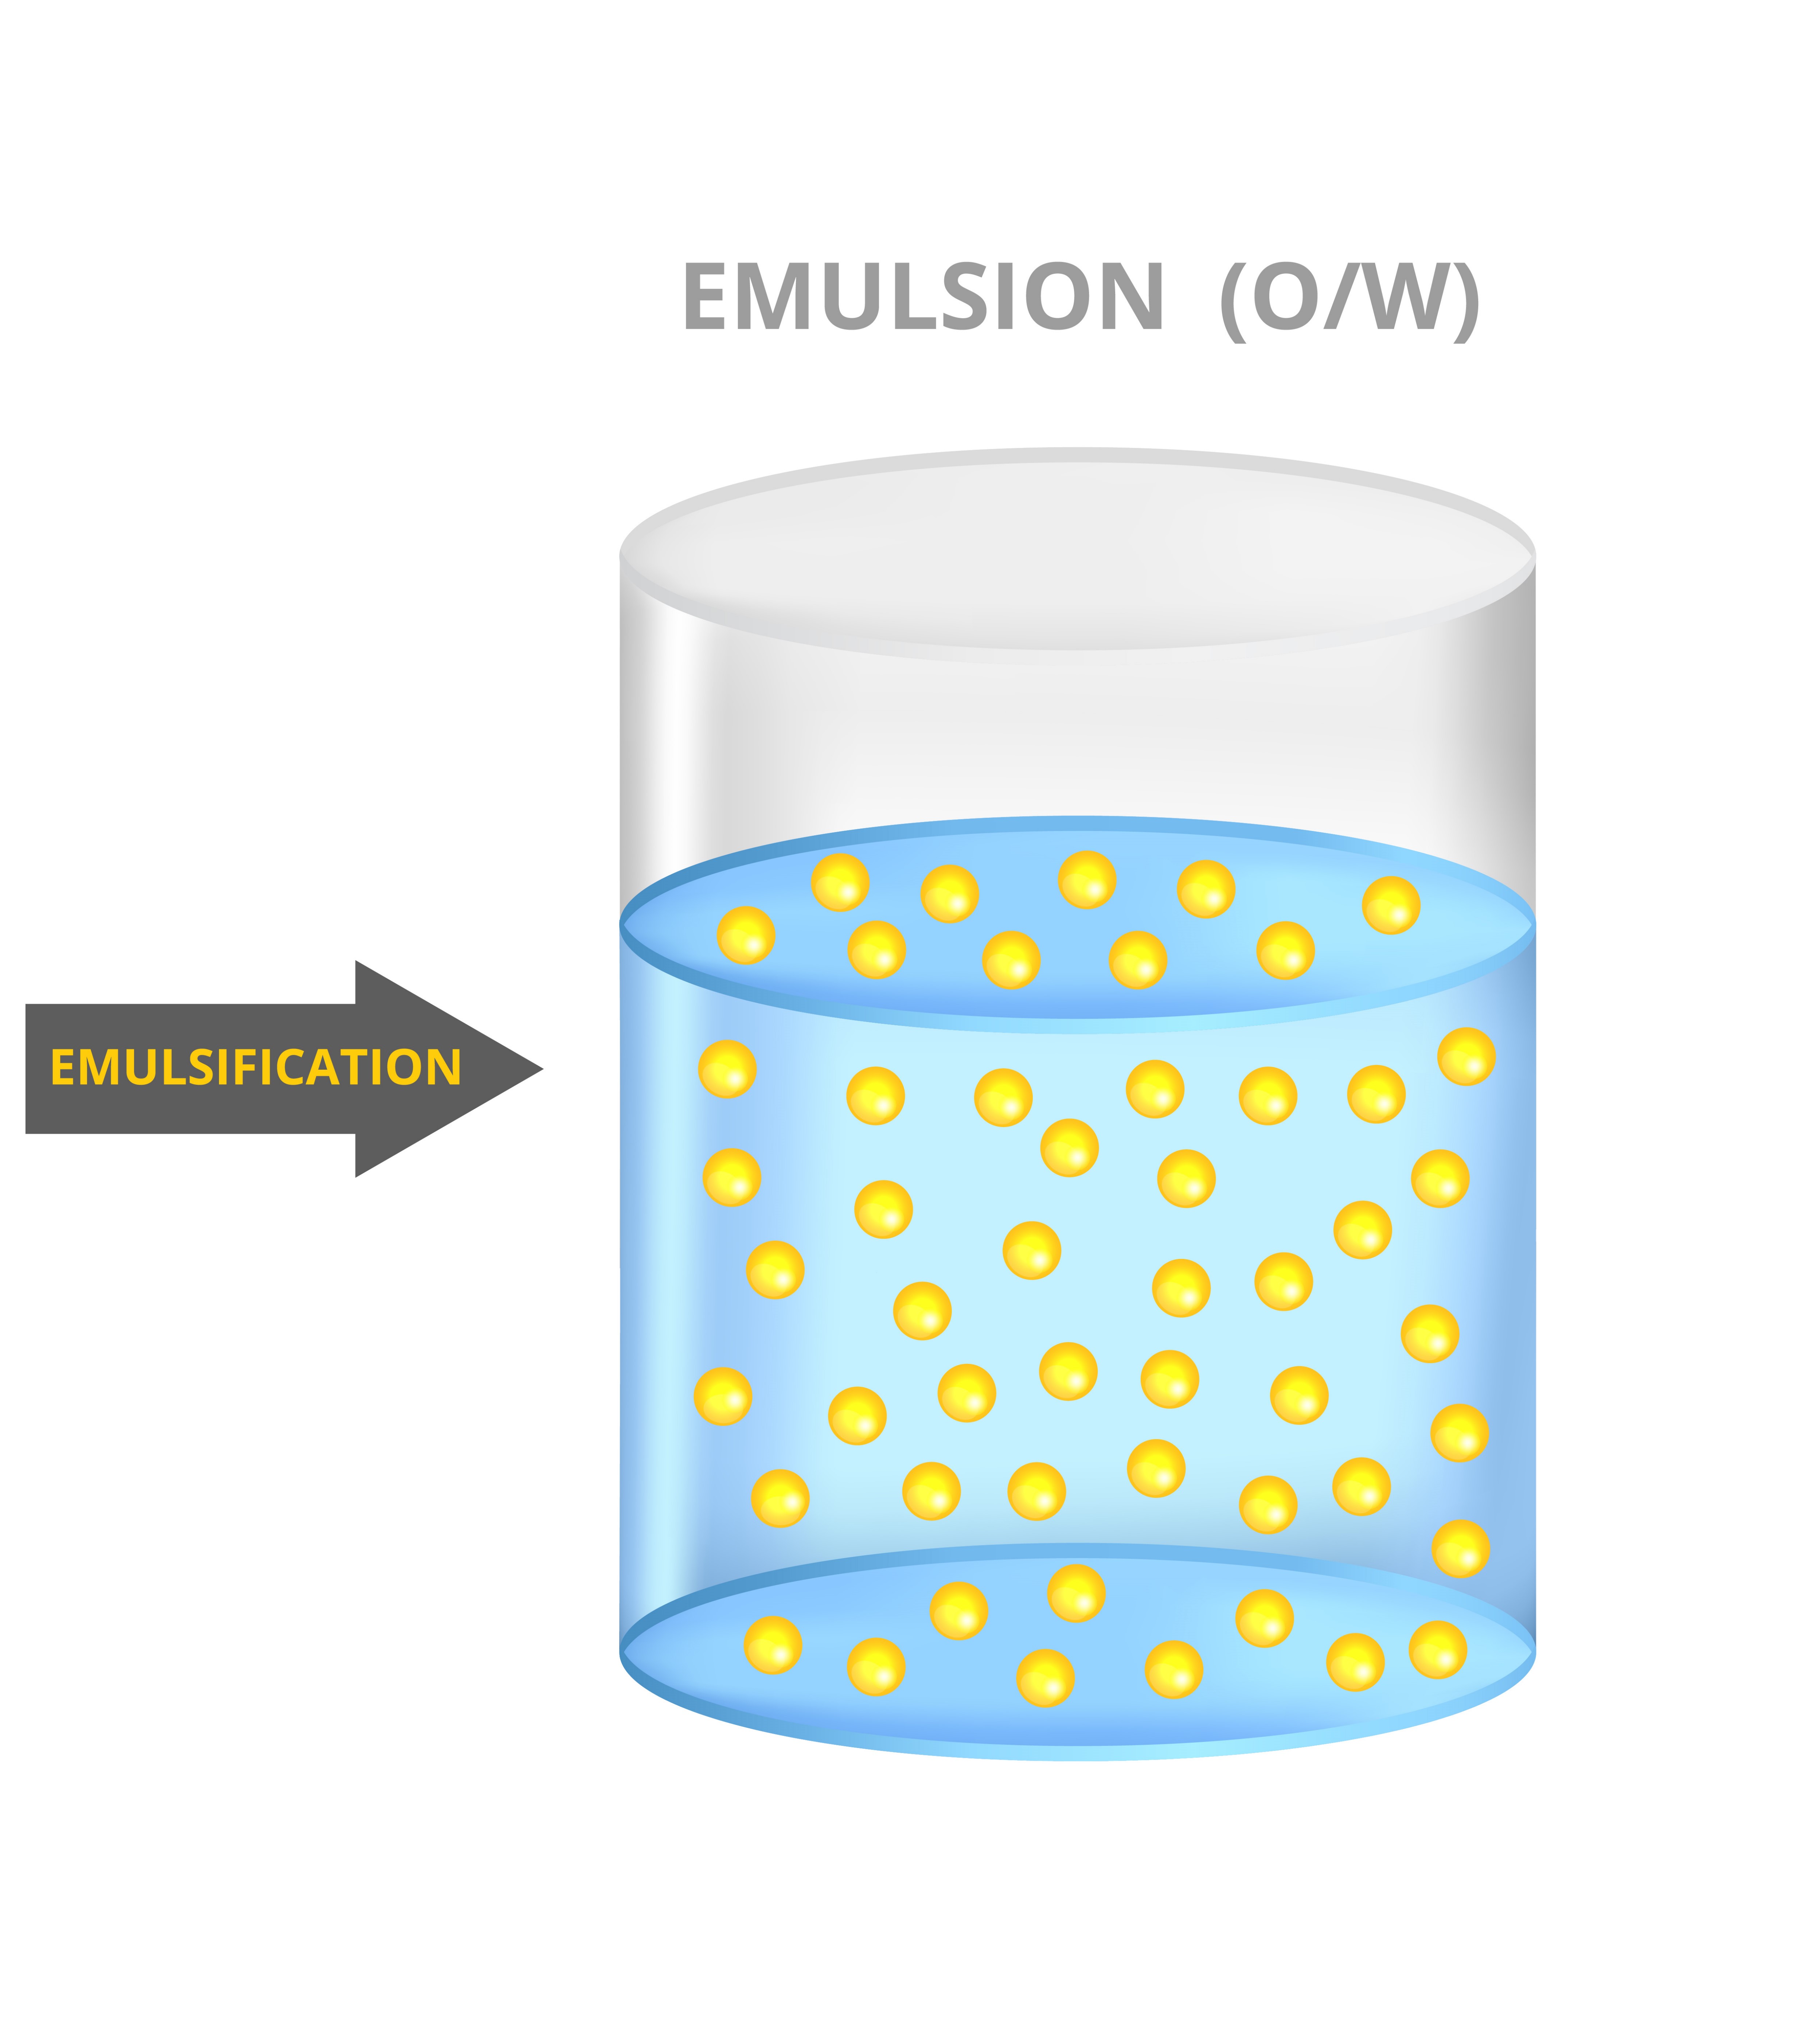 What is Pickering emulsion?